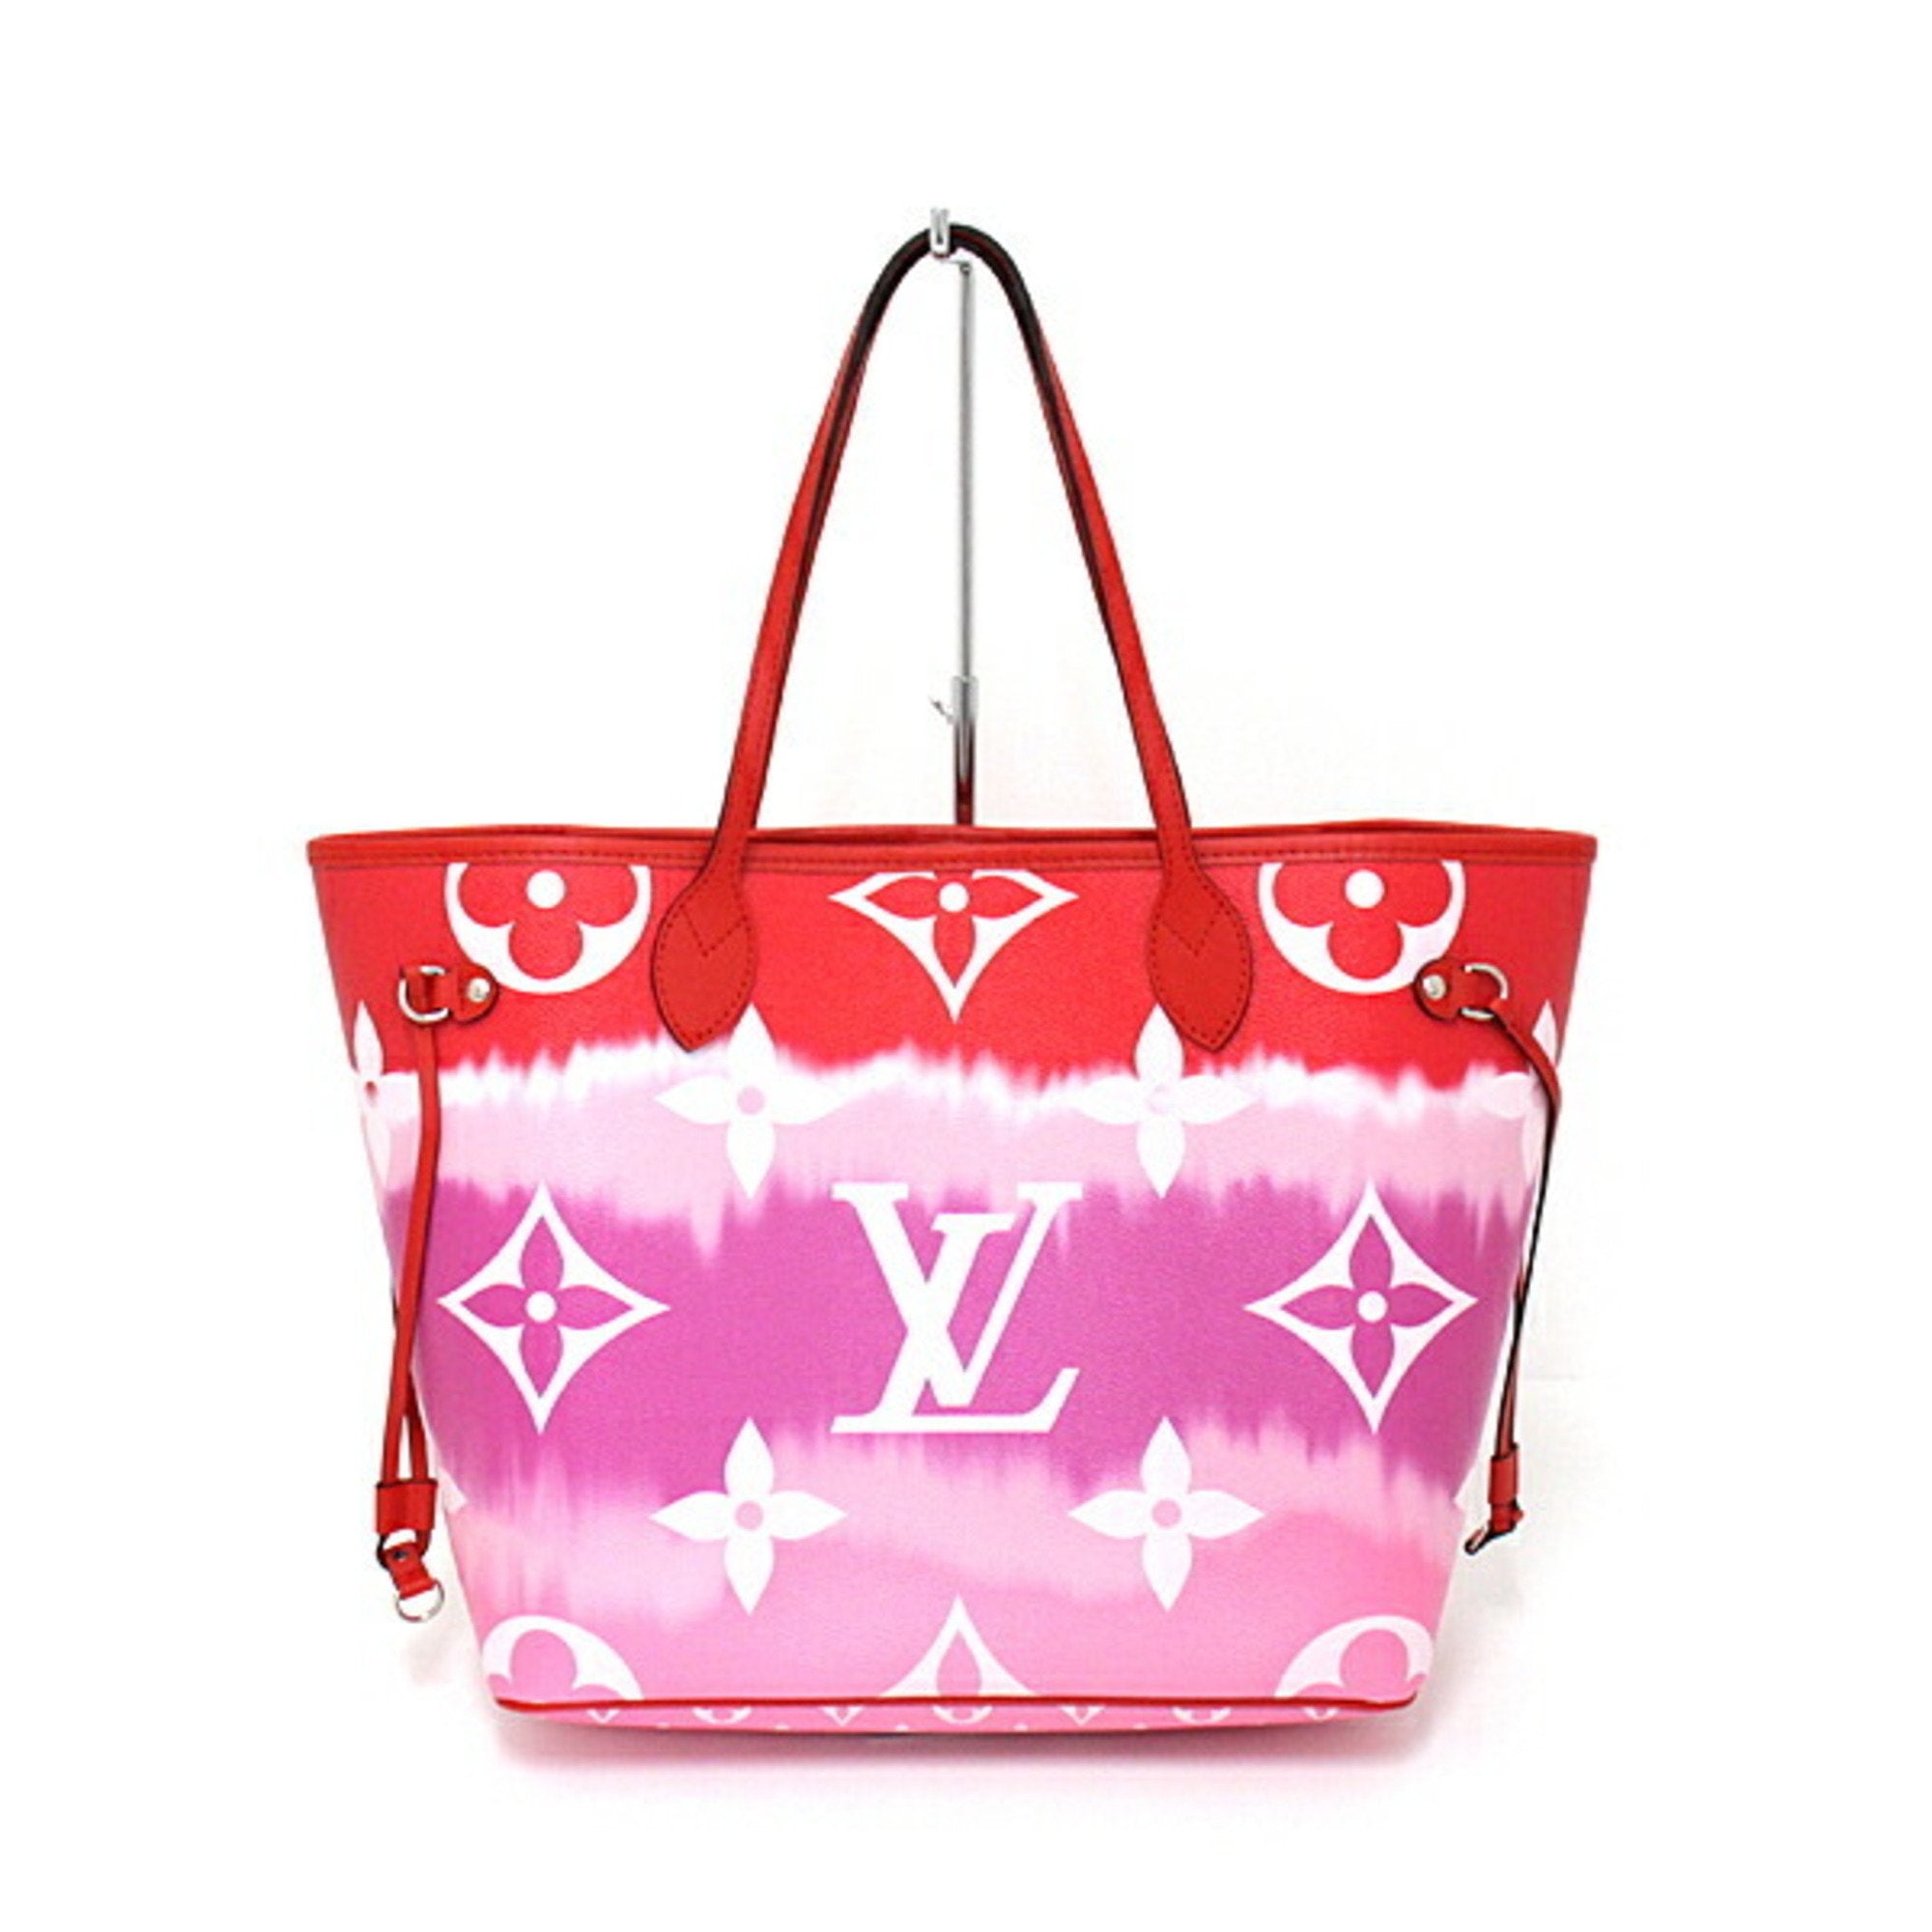 Louis Vuitton M41318 Neverfull MM Red Epi Tote Bag 11443